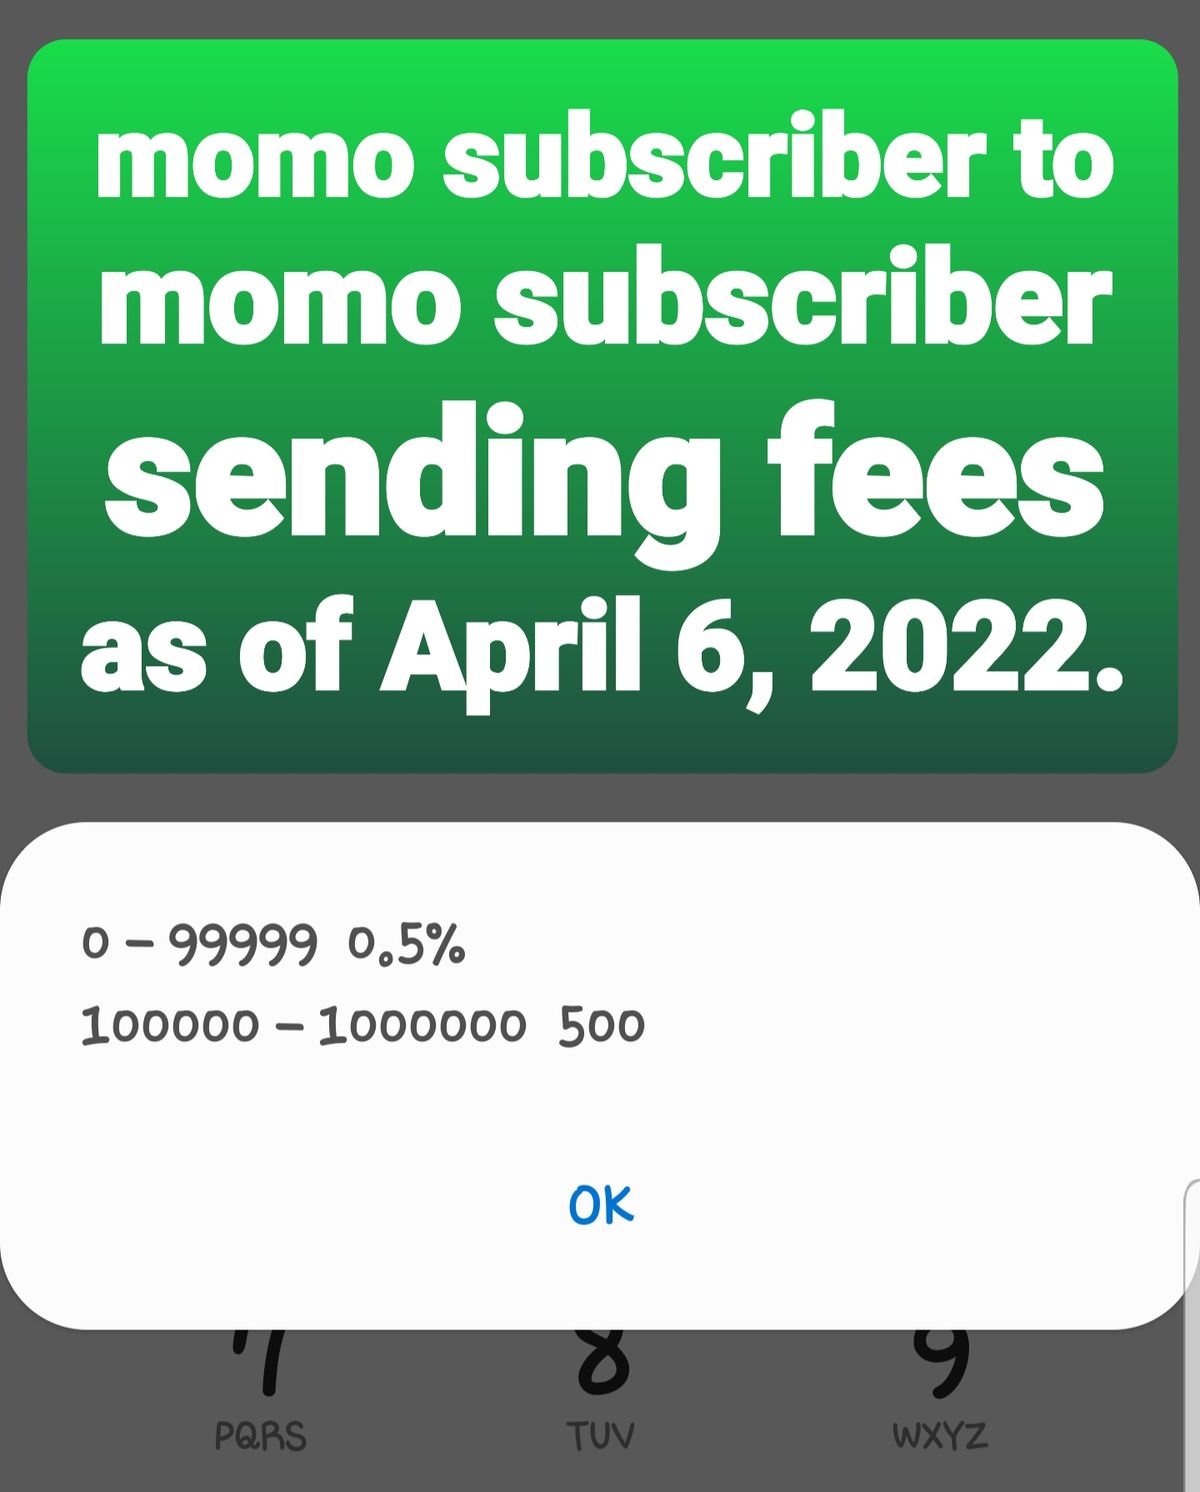 New sending fees with the Momo network